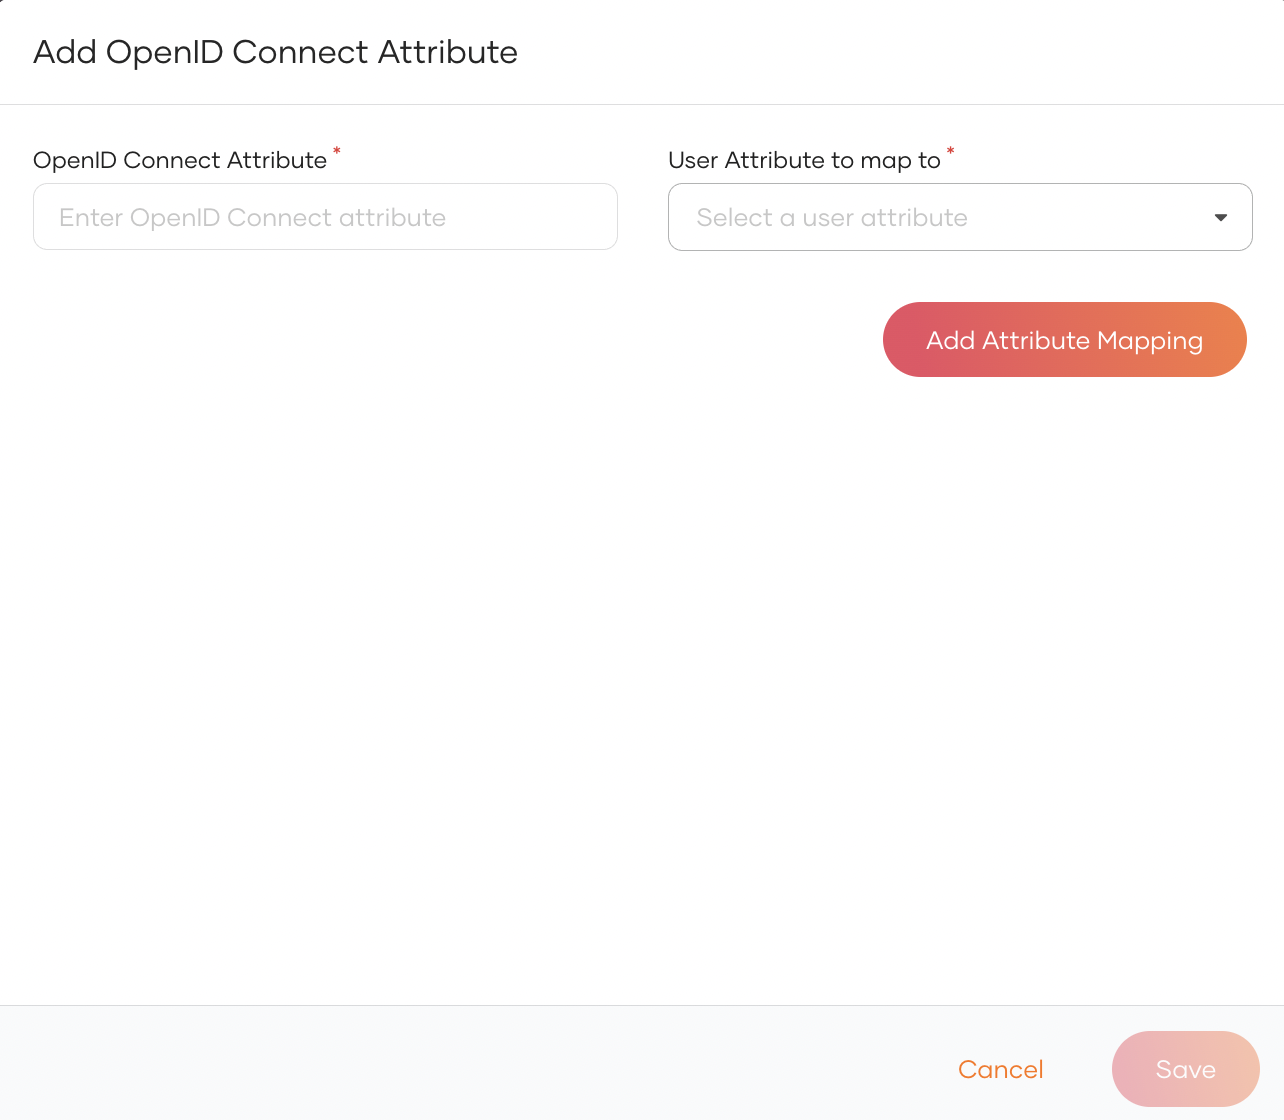 Add OpenID Connect attributes